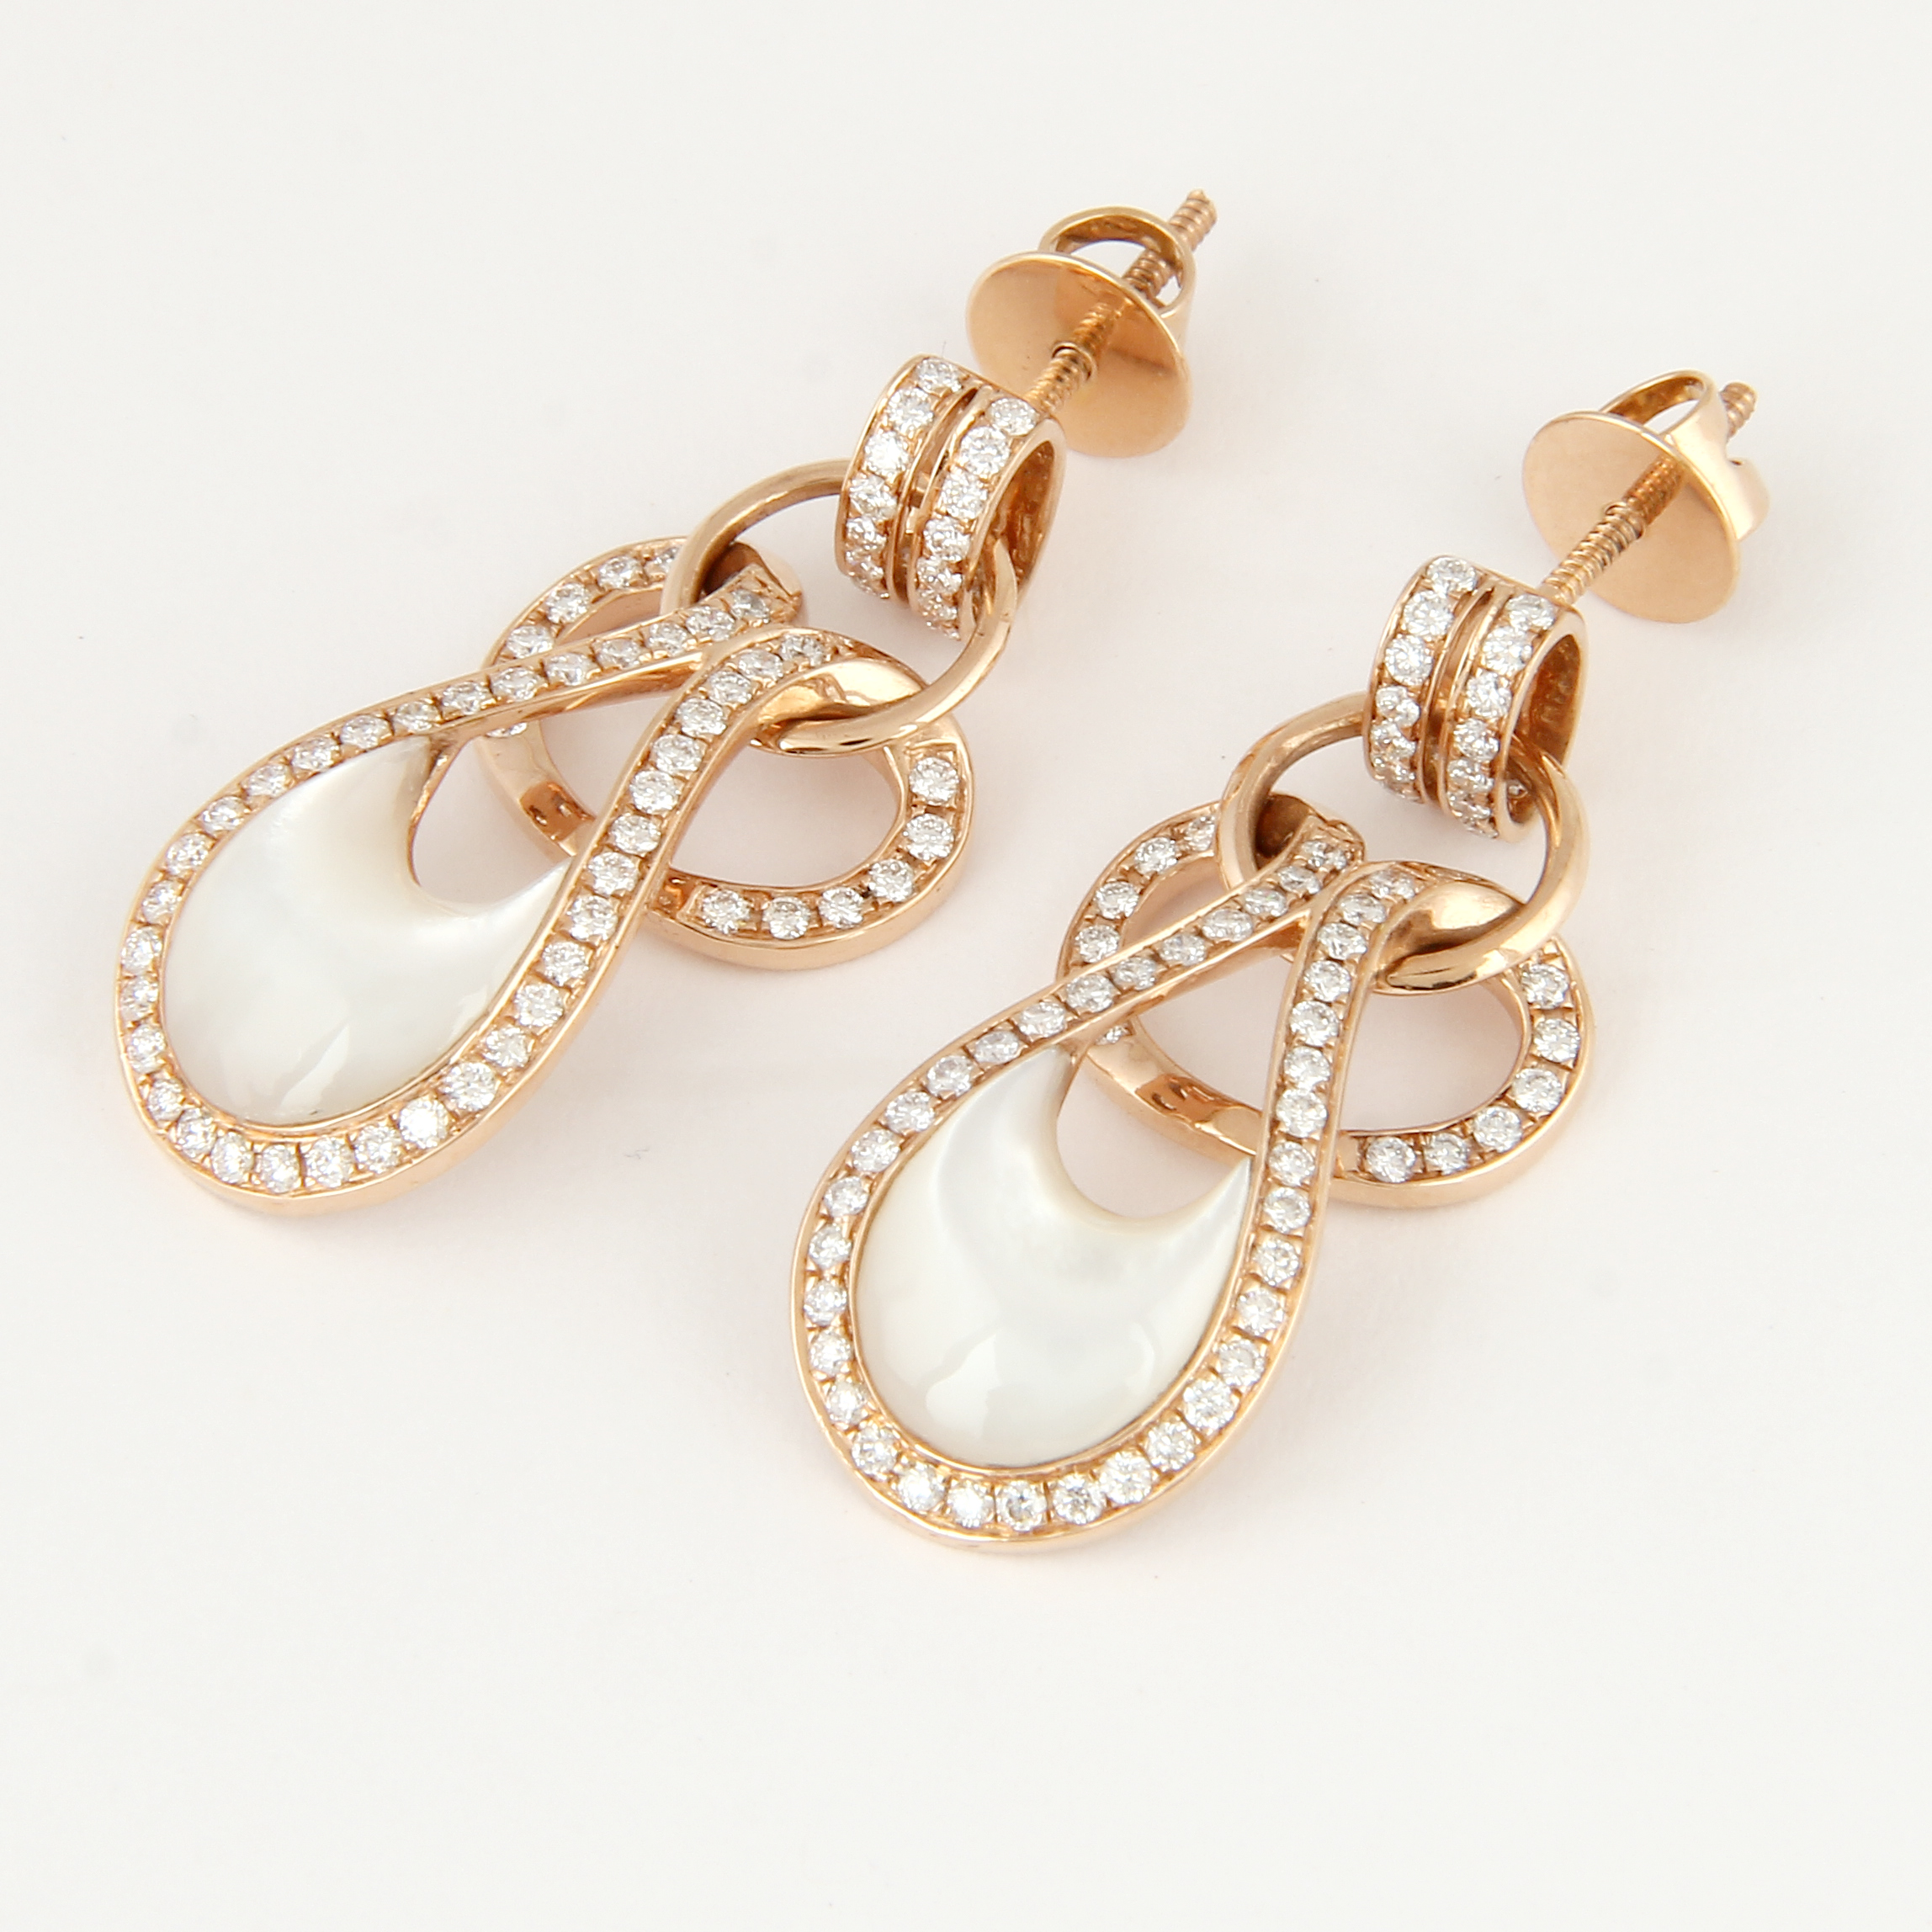 14 K Rose Gold Diamond & Mother of Pearl Earrings - Image 3 of 3